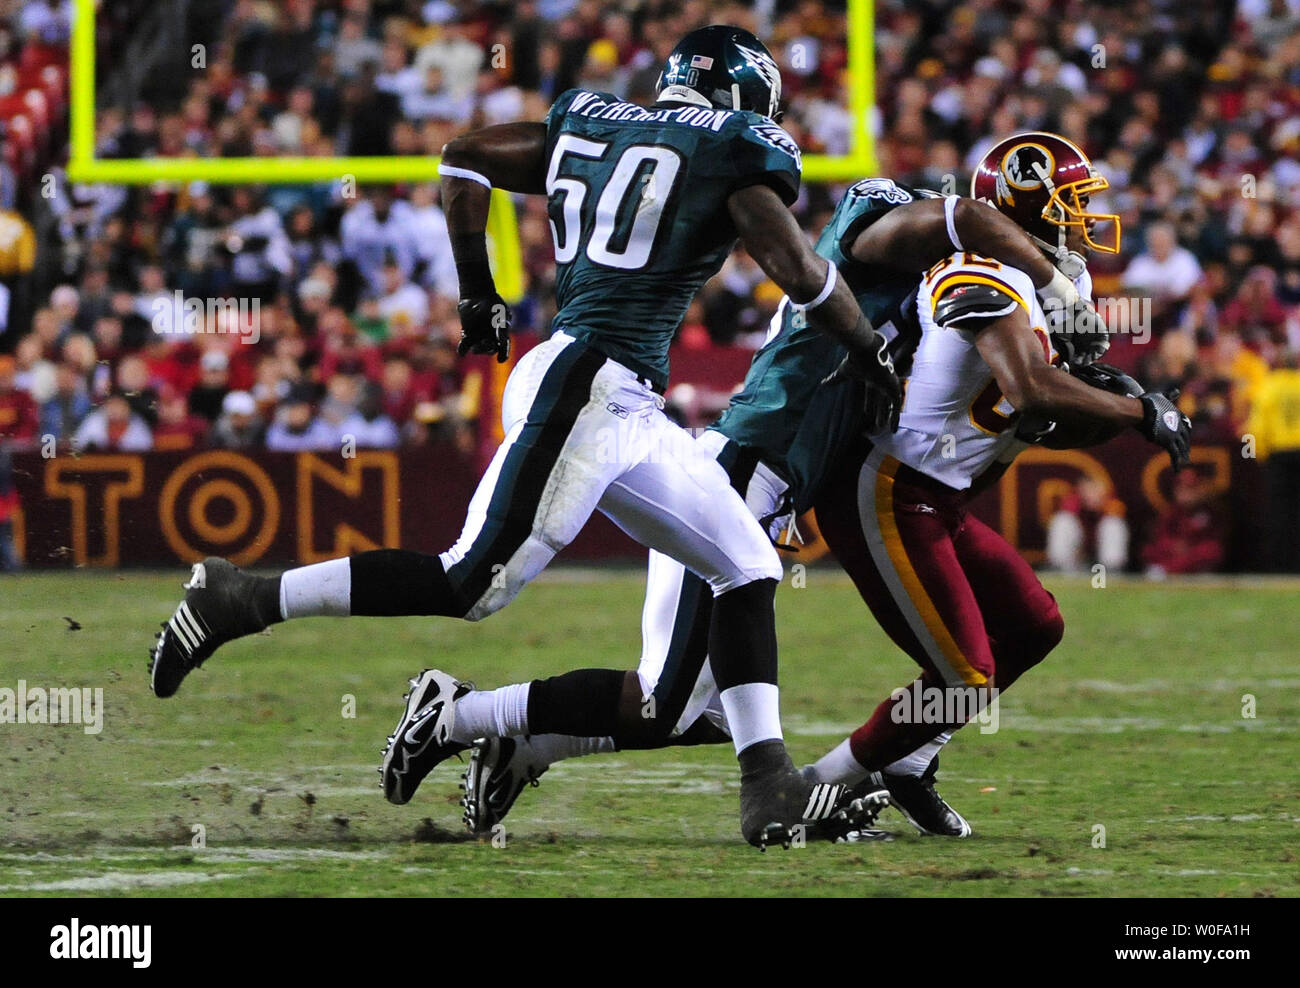 Washington Redskins' Antwaan Randle El is pulled down by the Philadelphia Eagles' defense after a gain of 1-yard during the second quarter at FedEx Field in Landover, Maryland on October 26, 2009.    UPI/Kevin Dietsch Stock Photo